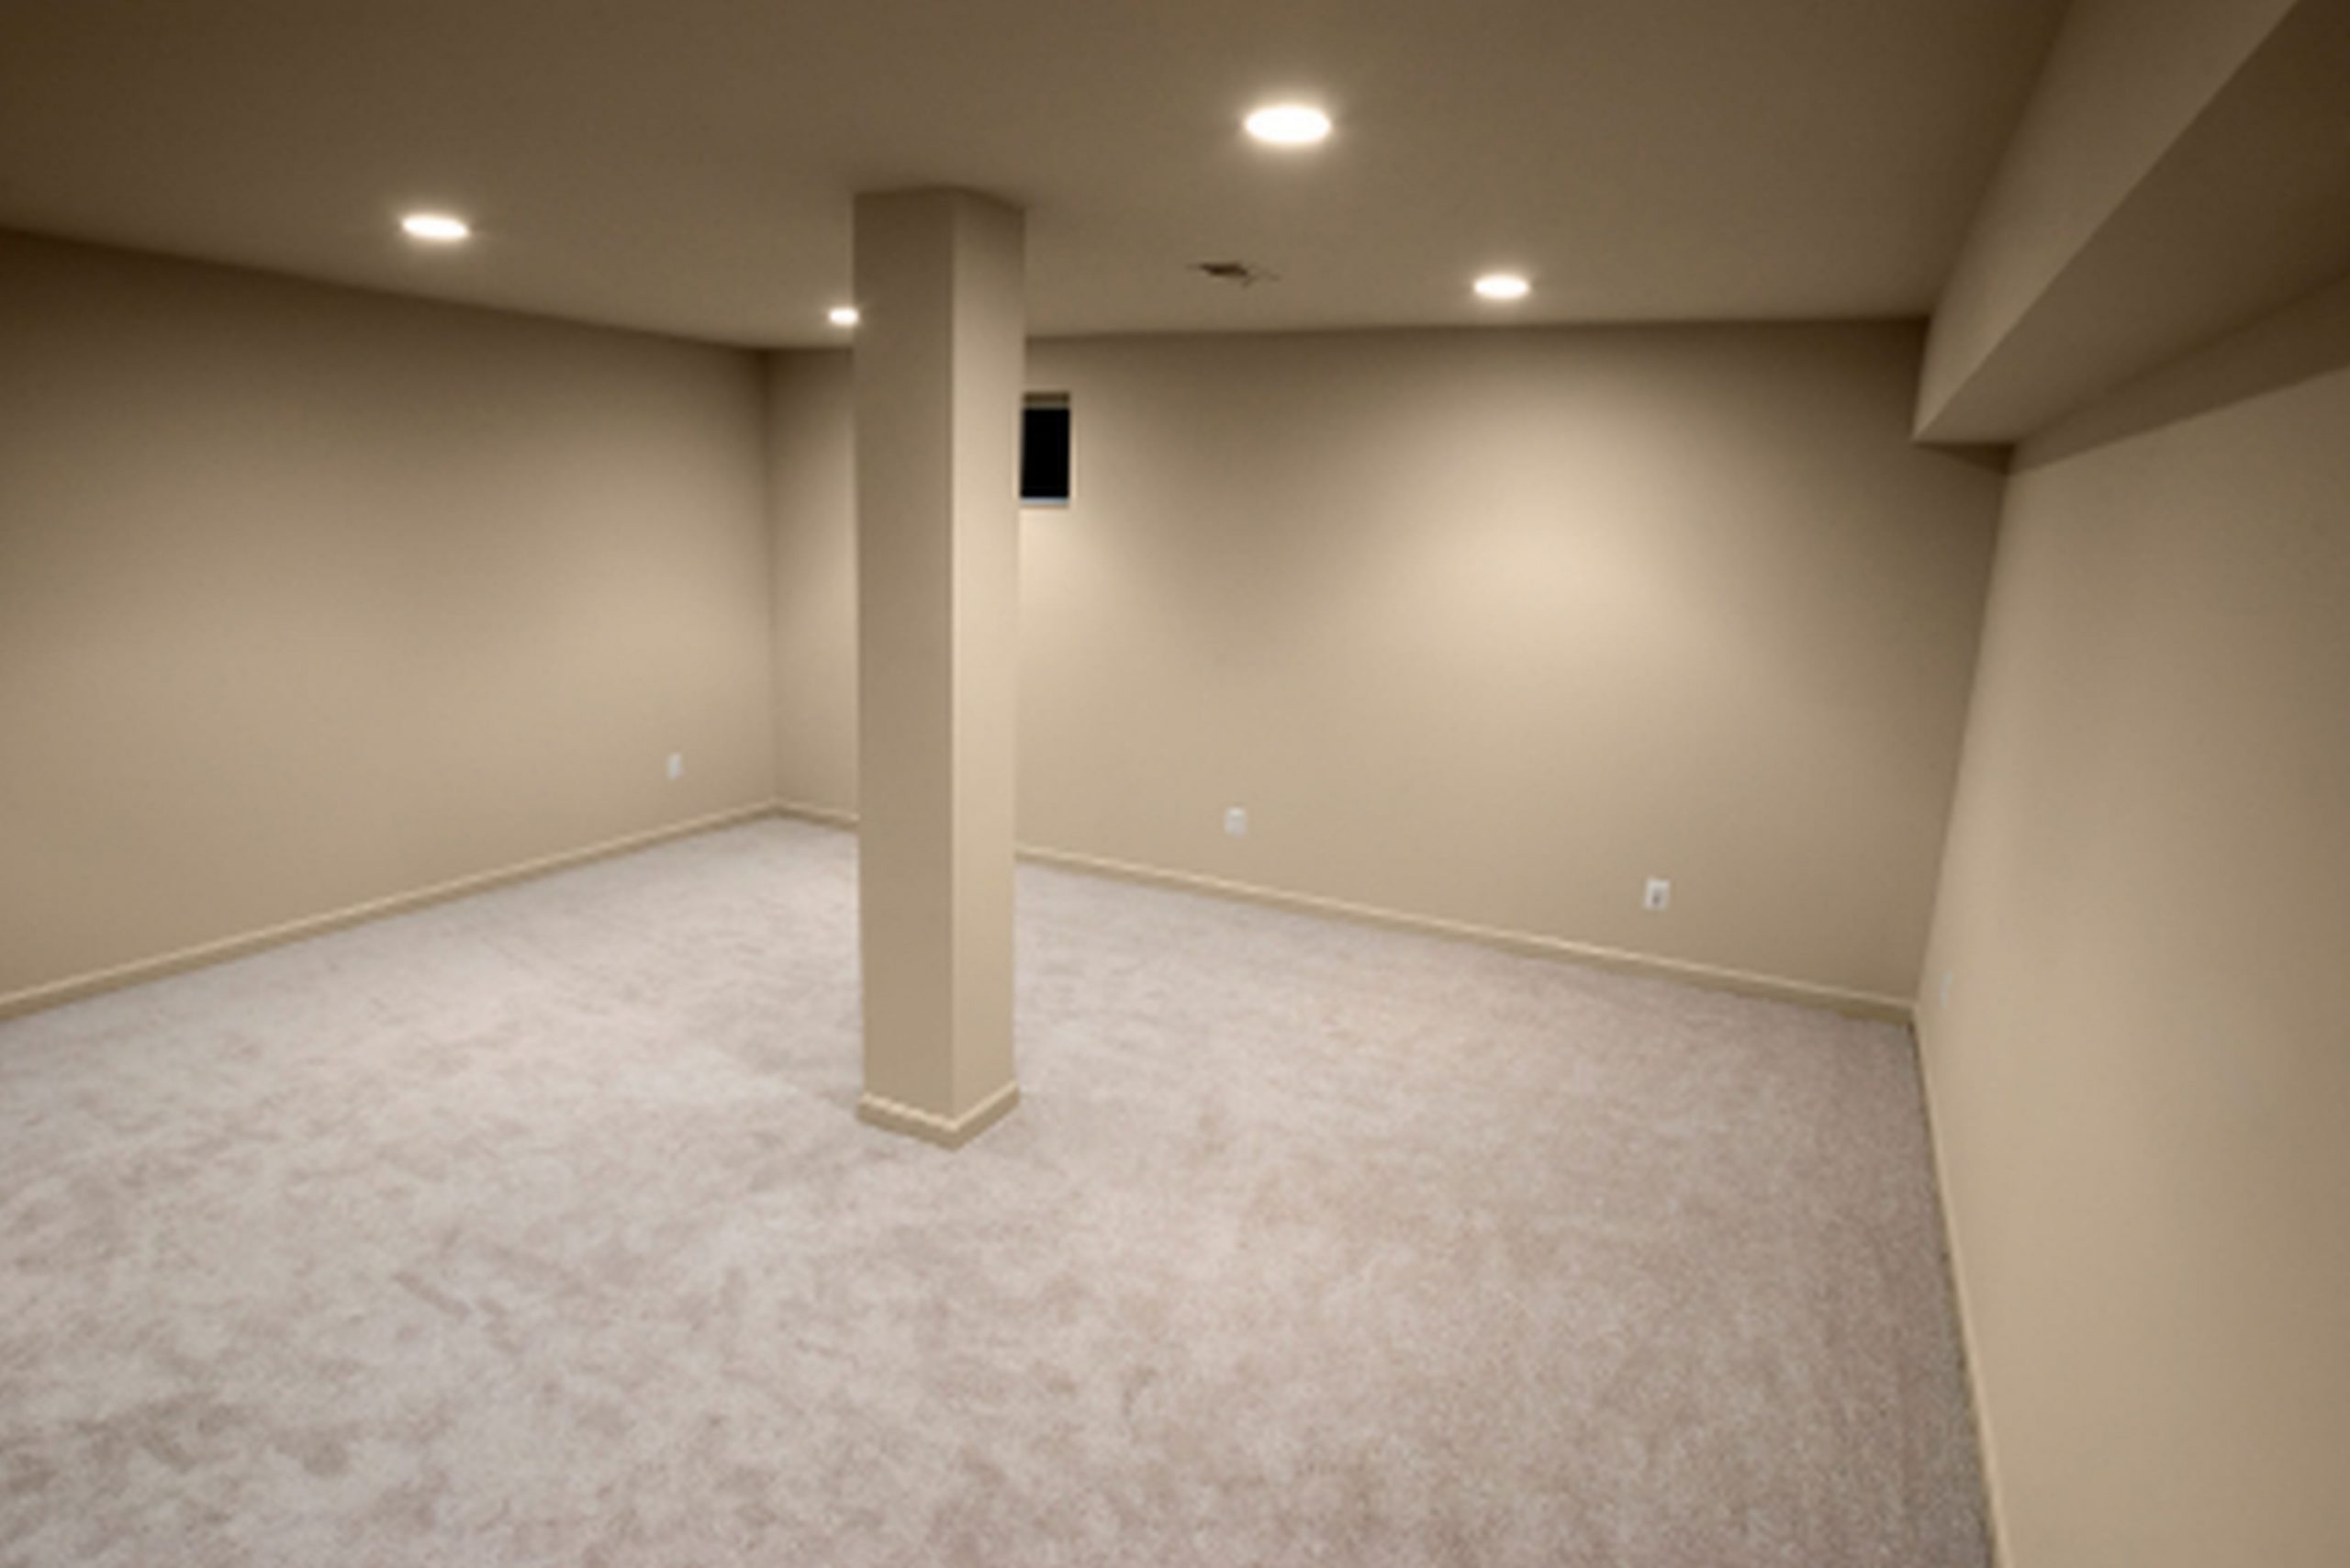  Amazing Basement Floor And Wall Color Ideas 